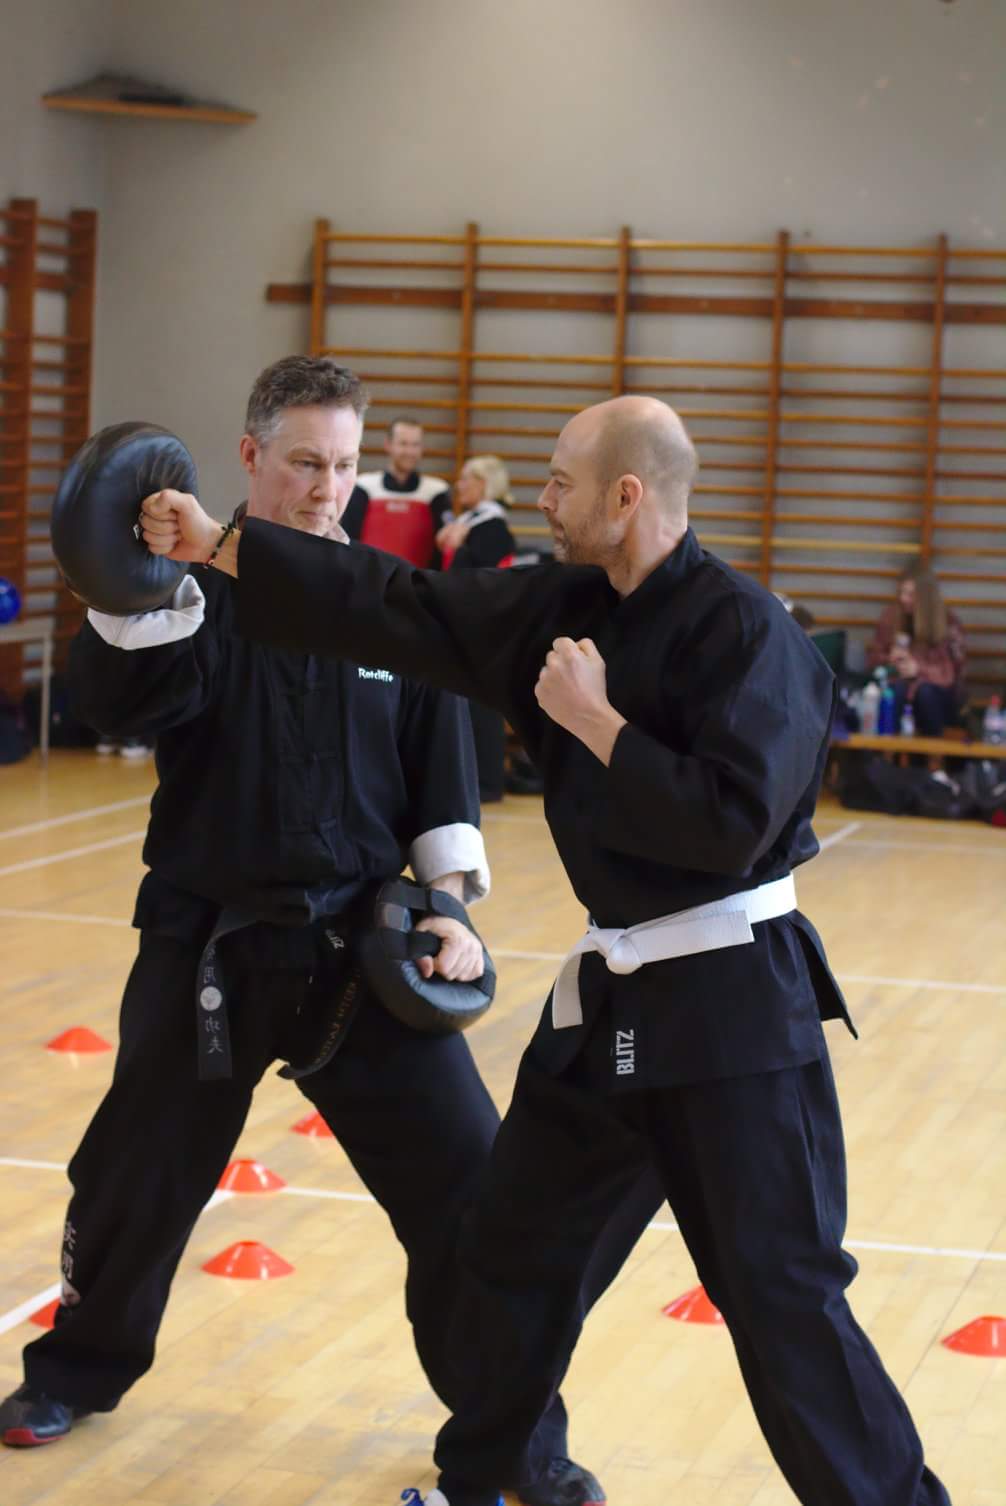 punching techniques at kung fu training in norwich